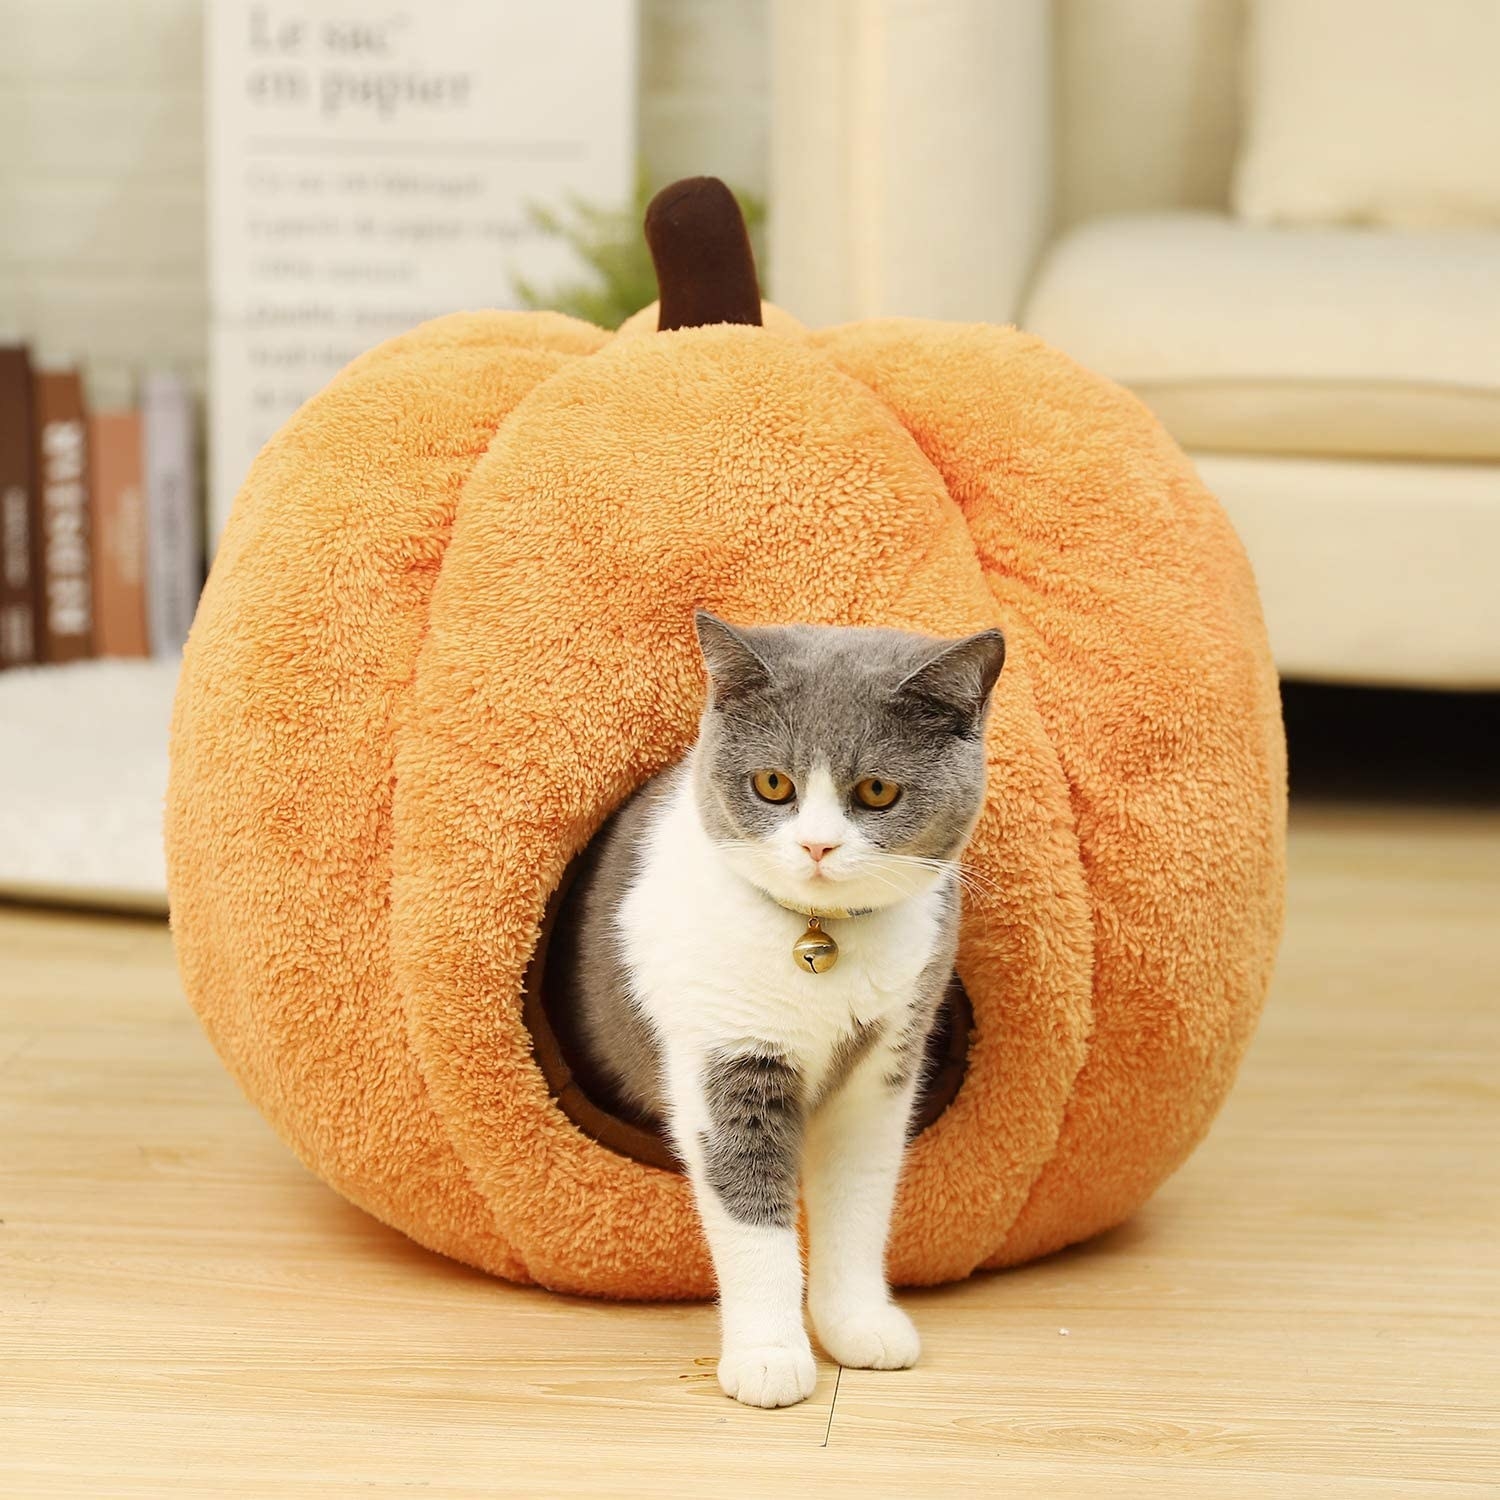 A cat emerges from a pumpkin shaped car home